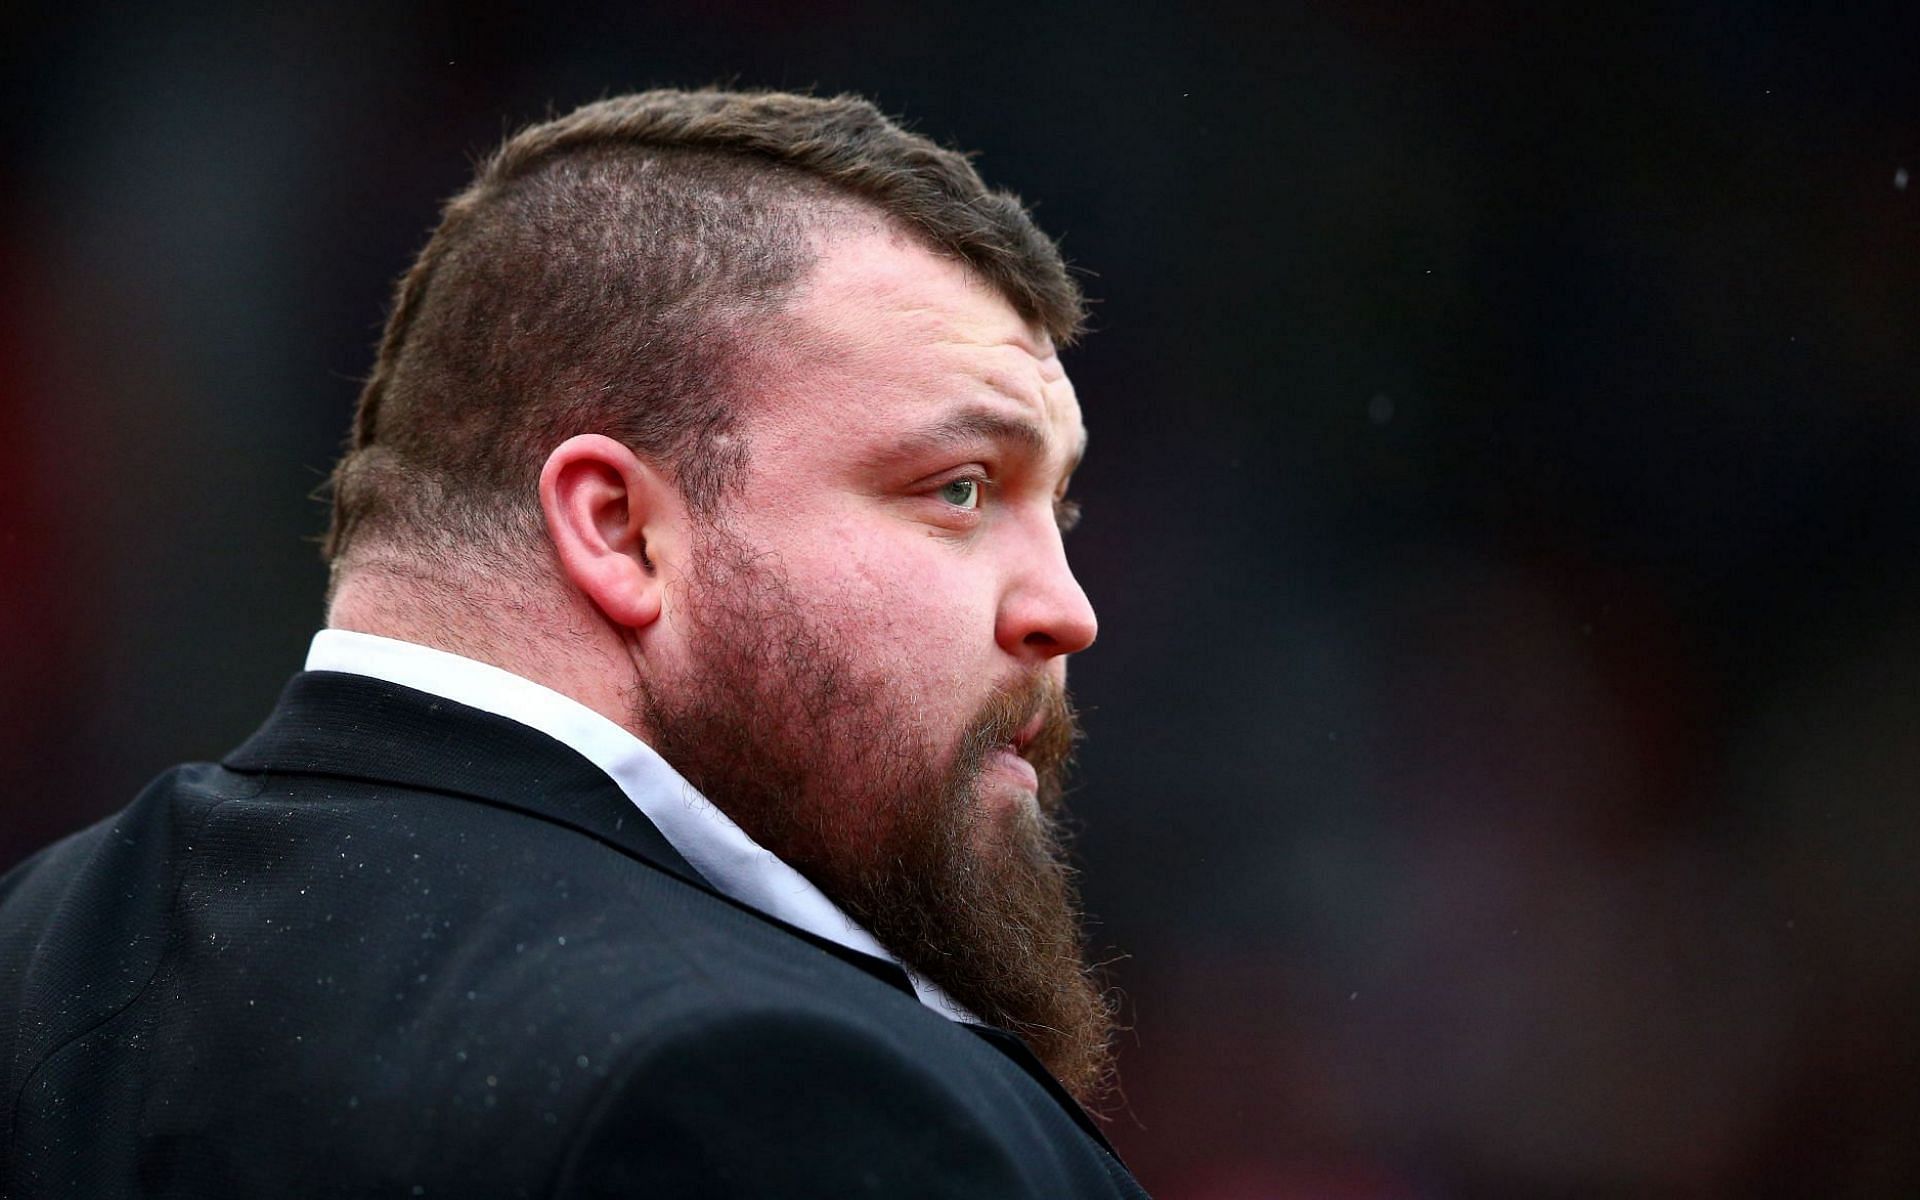 Eddie Hall broke the punchbag machine during a recent appearance at the Arnold Sports Festival in the UK